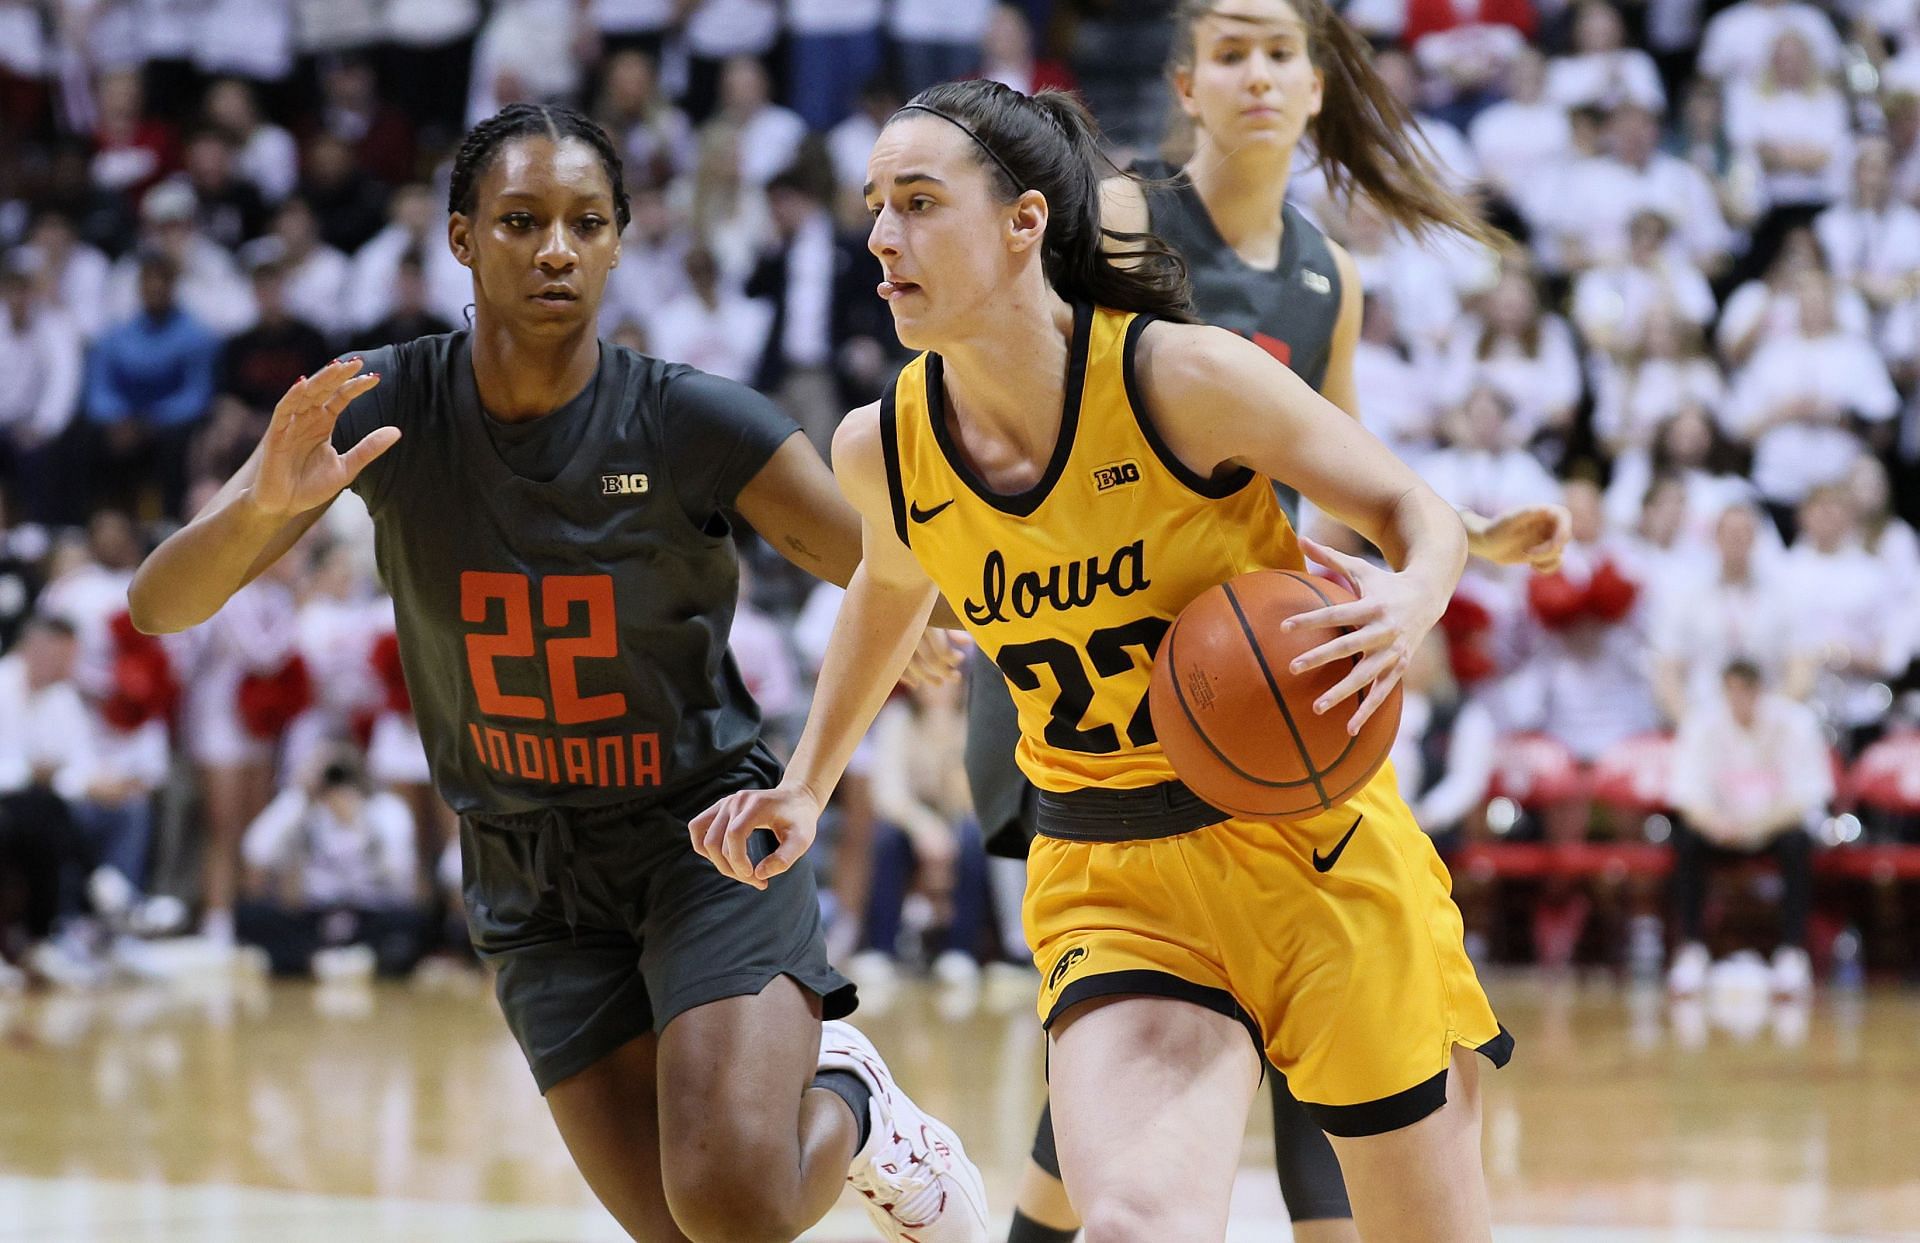 Caitlin Clark #22 of the Iowa Hawkeyes dribbles the ball in the first half against the Indiana Hoosiers at Simon Skjodt Assembly Hall.